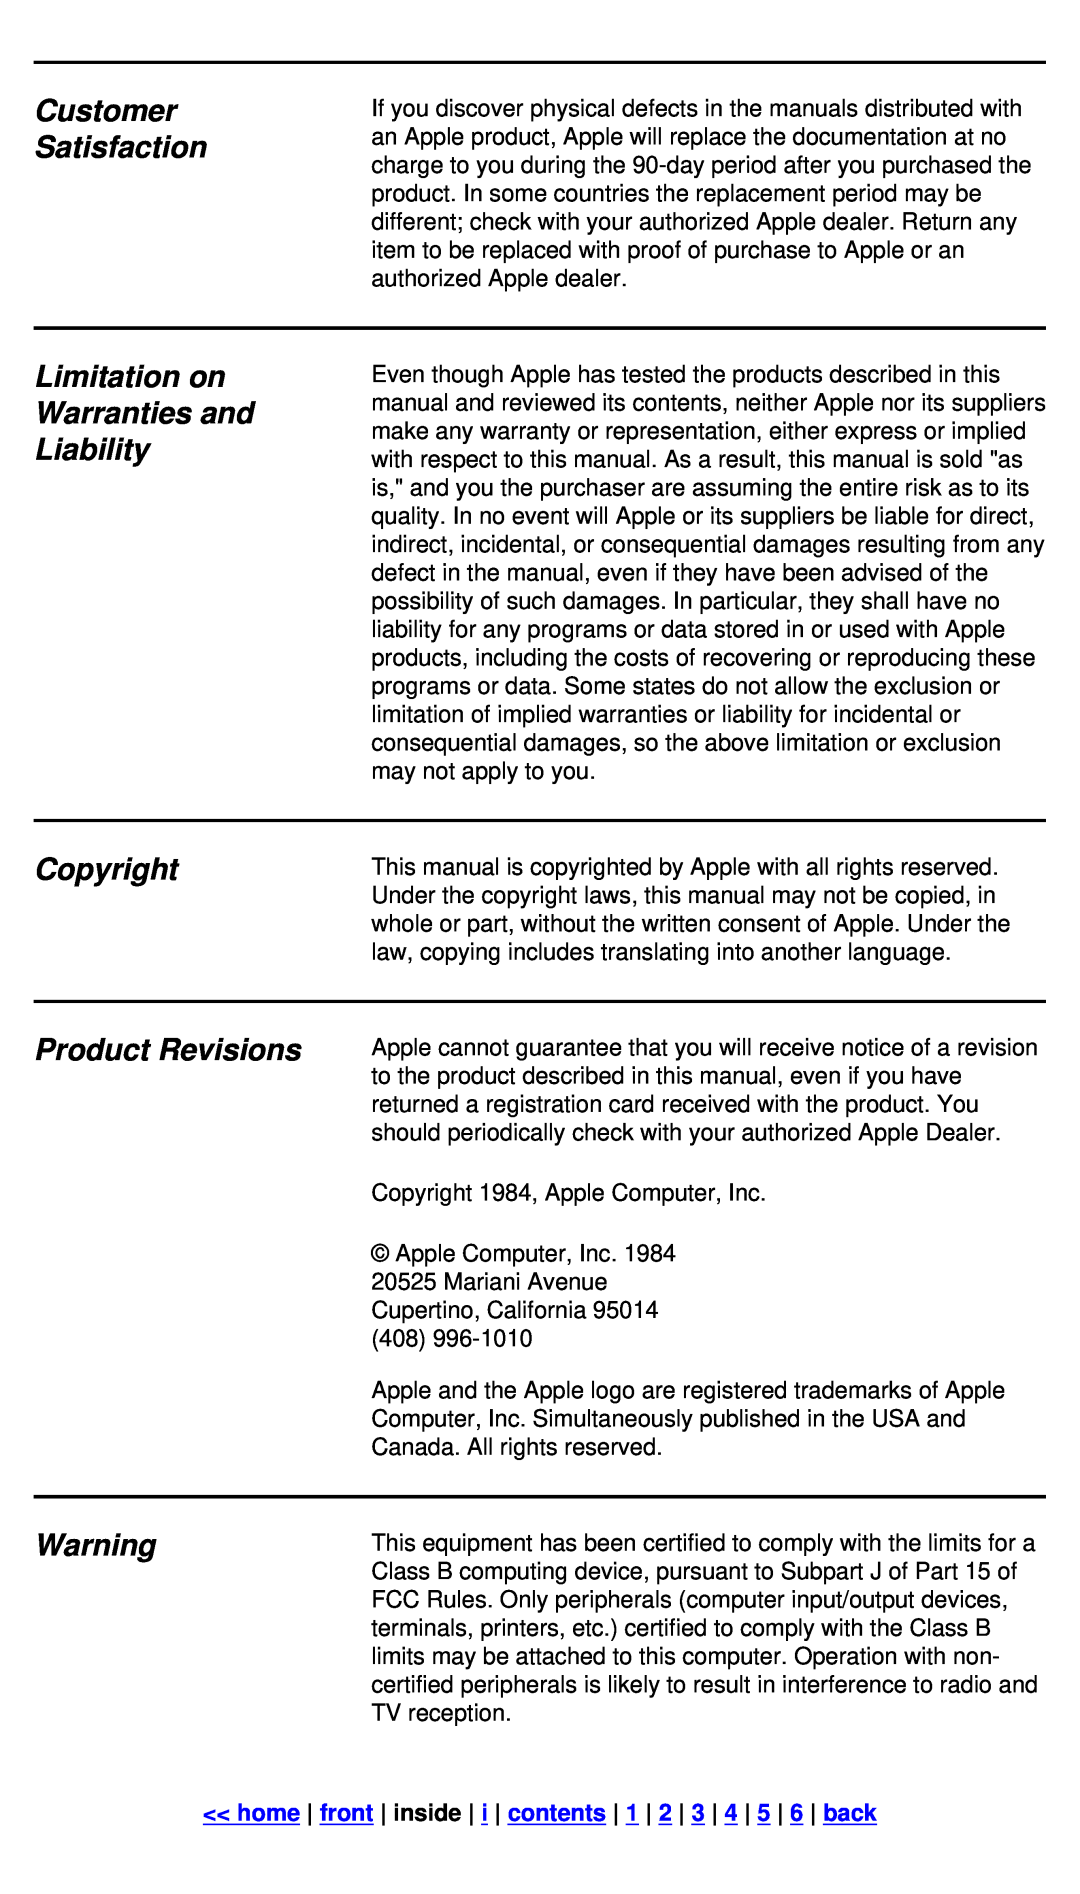 Apple IIc manual Customer Satisfaction, Limitation on Warranties and Liability, Copyright, Product Revisions 